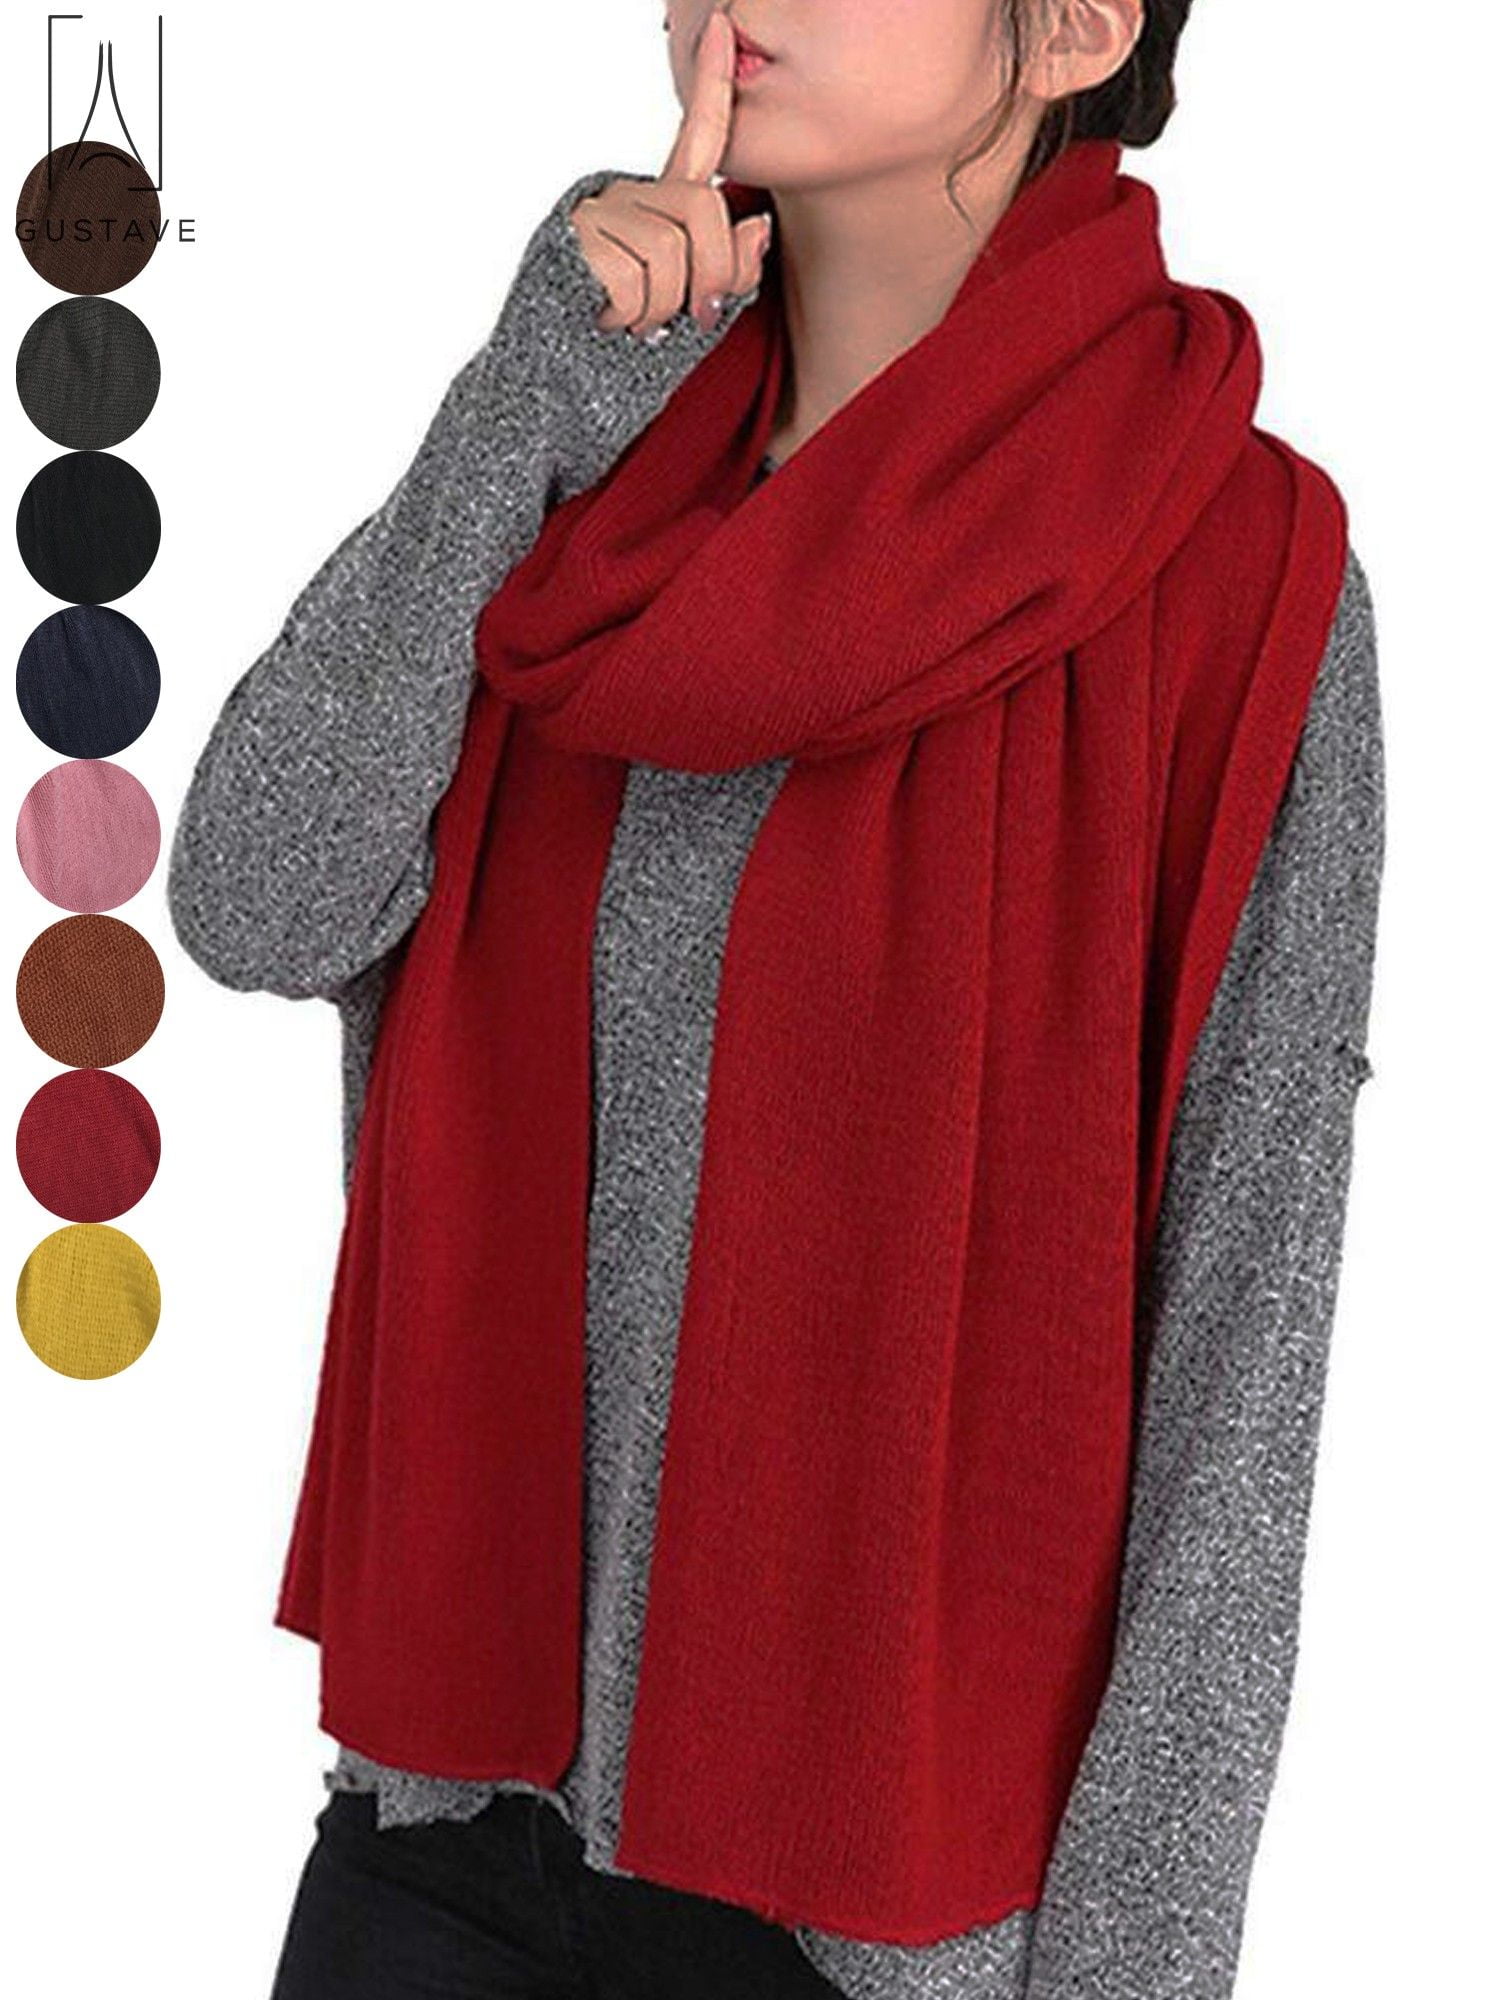 Oversized Crimson Red Scarf for Men Women Scarf Red Circle Scarf Red Cotton Scarf Boyfriend Gift Husband Gift for Men Preppy Scarf